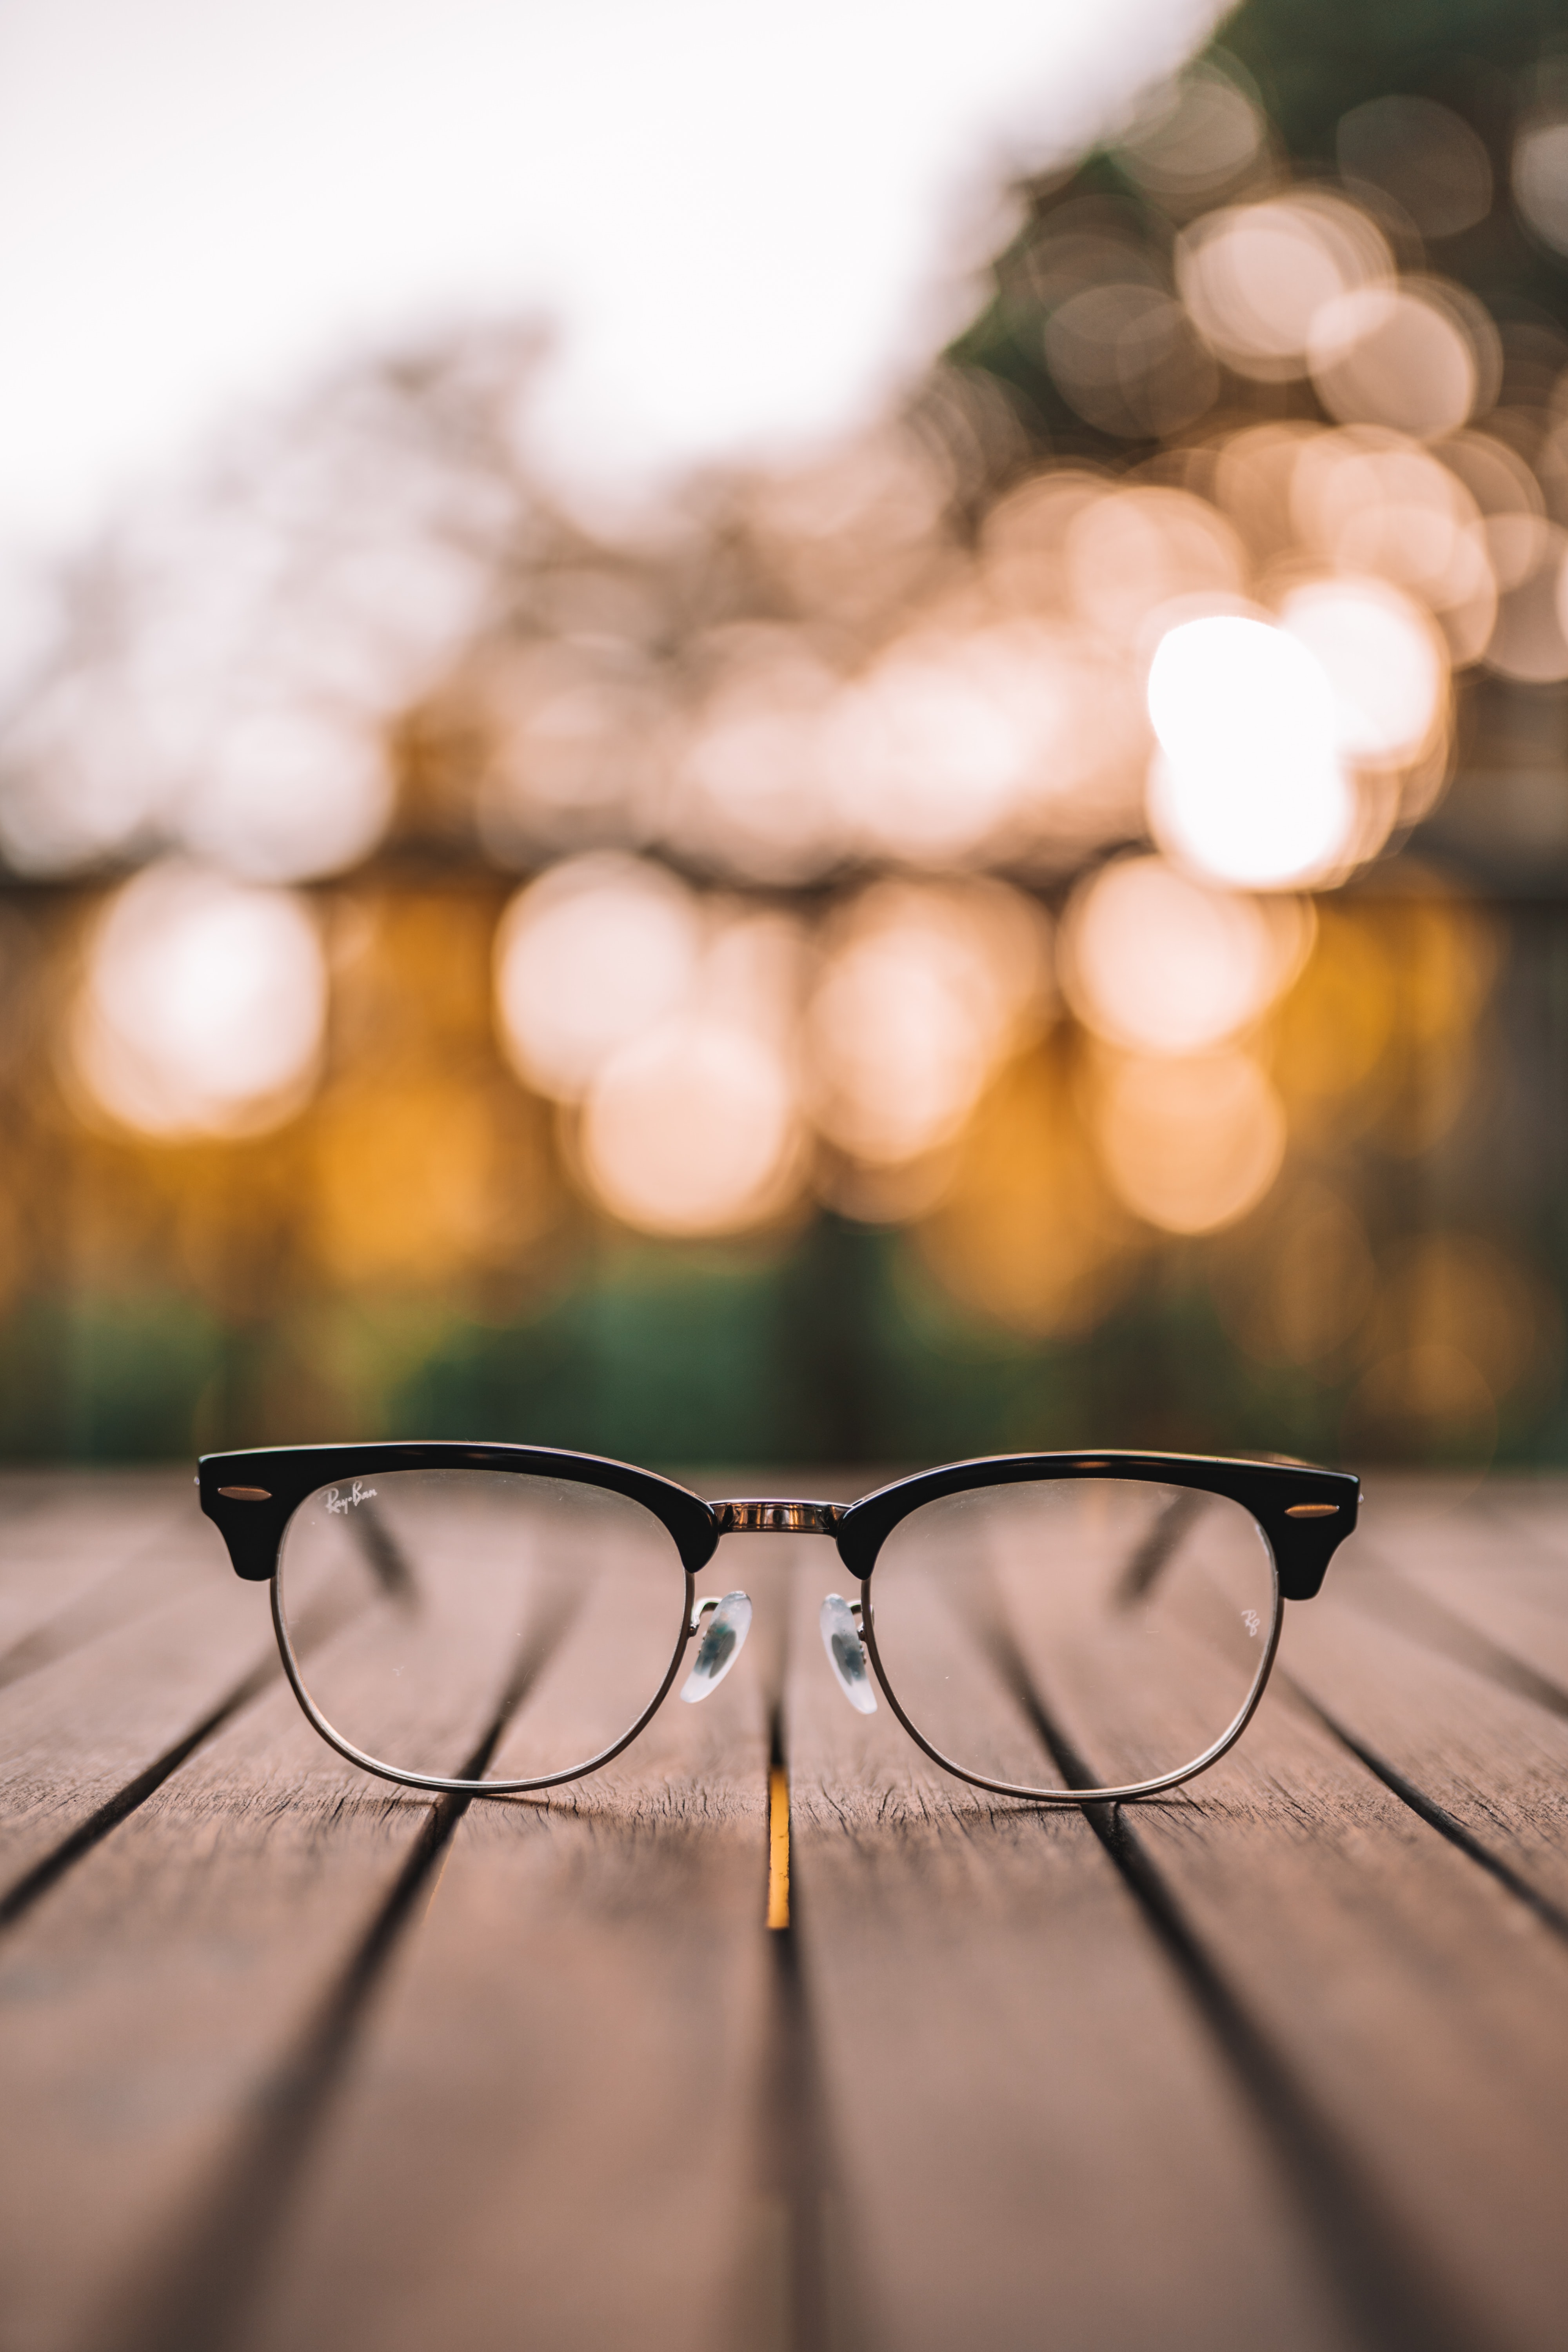 vertical wallpaper miscellanea, miscellaneous, wood, wooden, blur, smooth, lenses, planks, board, glasses, spectacles